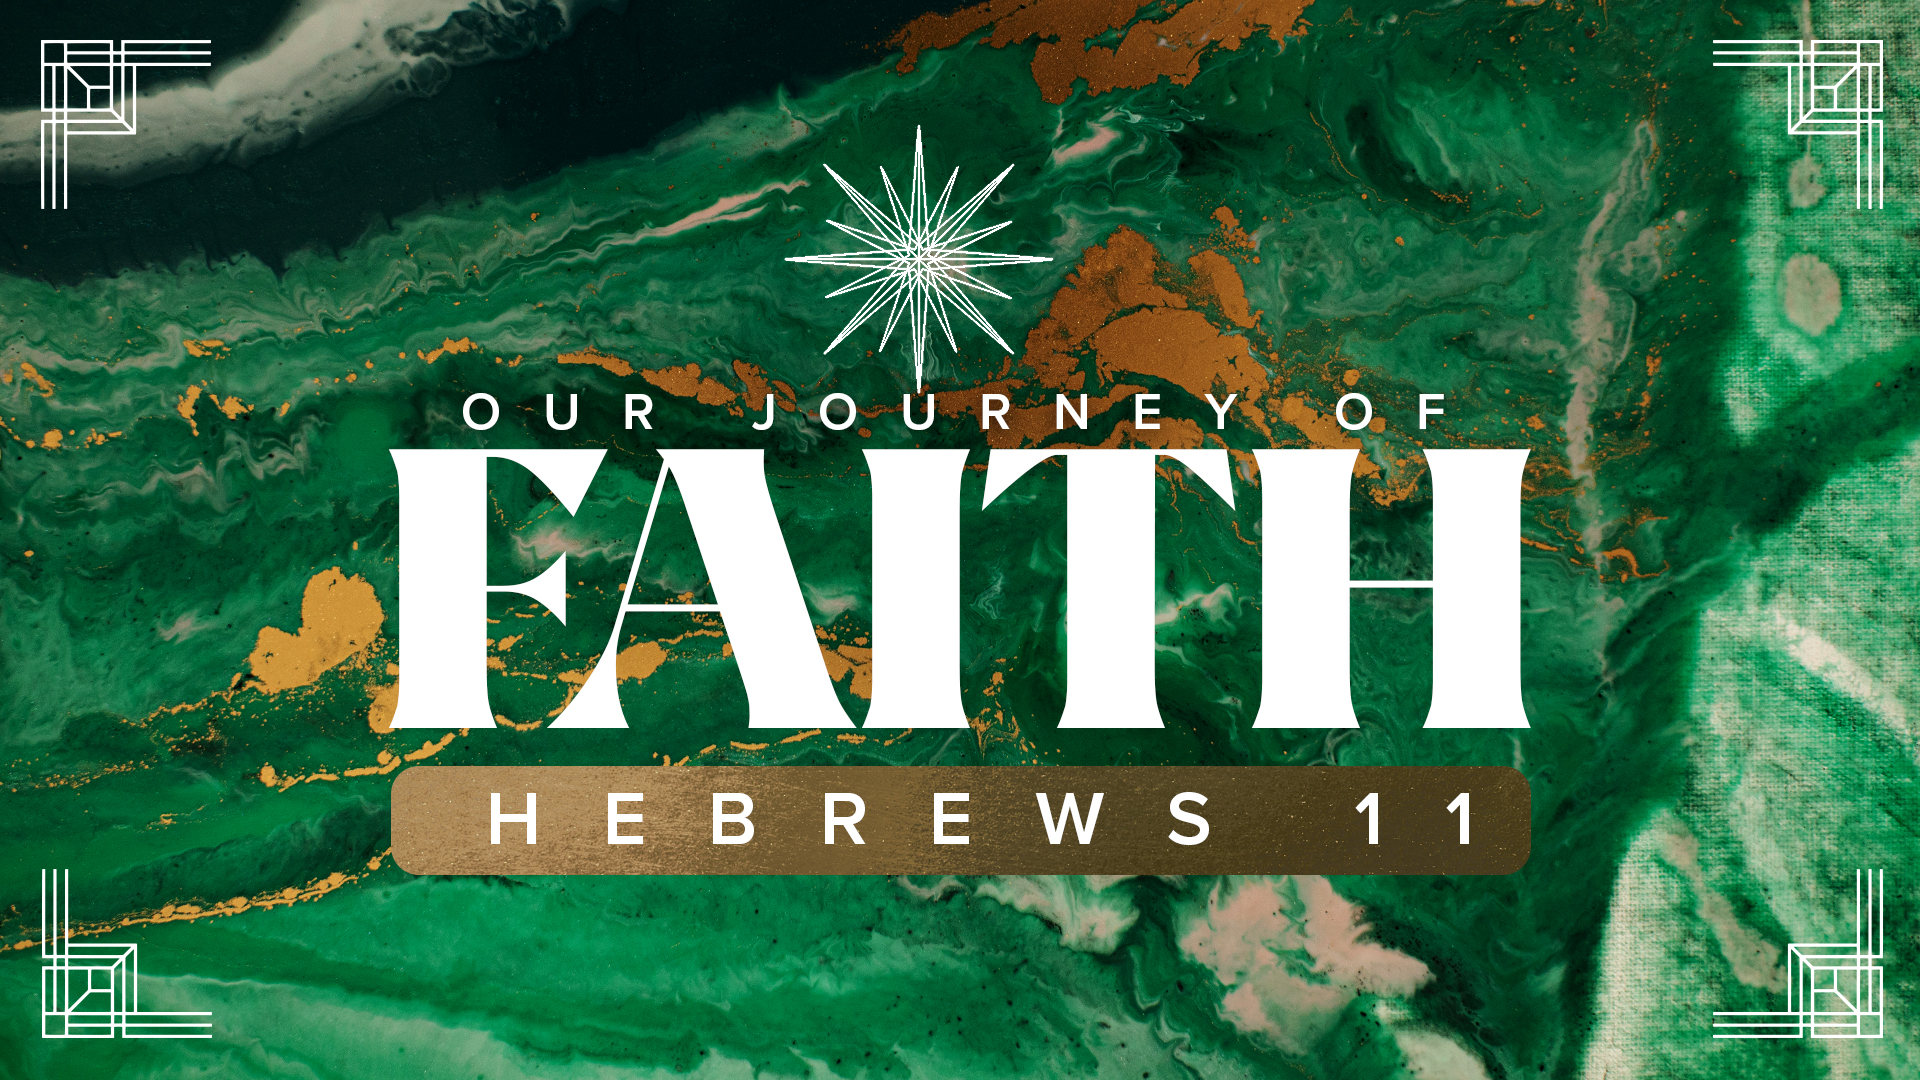 Hebrews 11:30-40: Uncommon Heroes of the Faith (Our Journey of Faith) Image